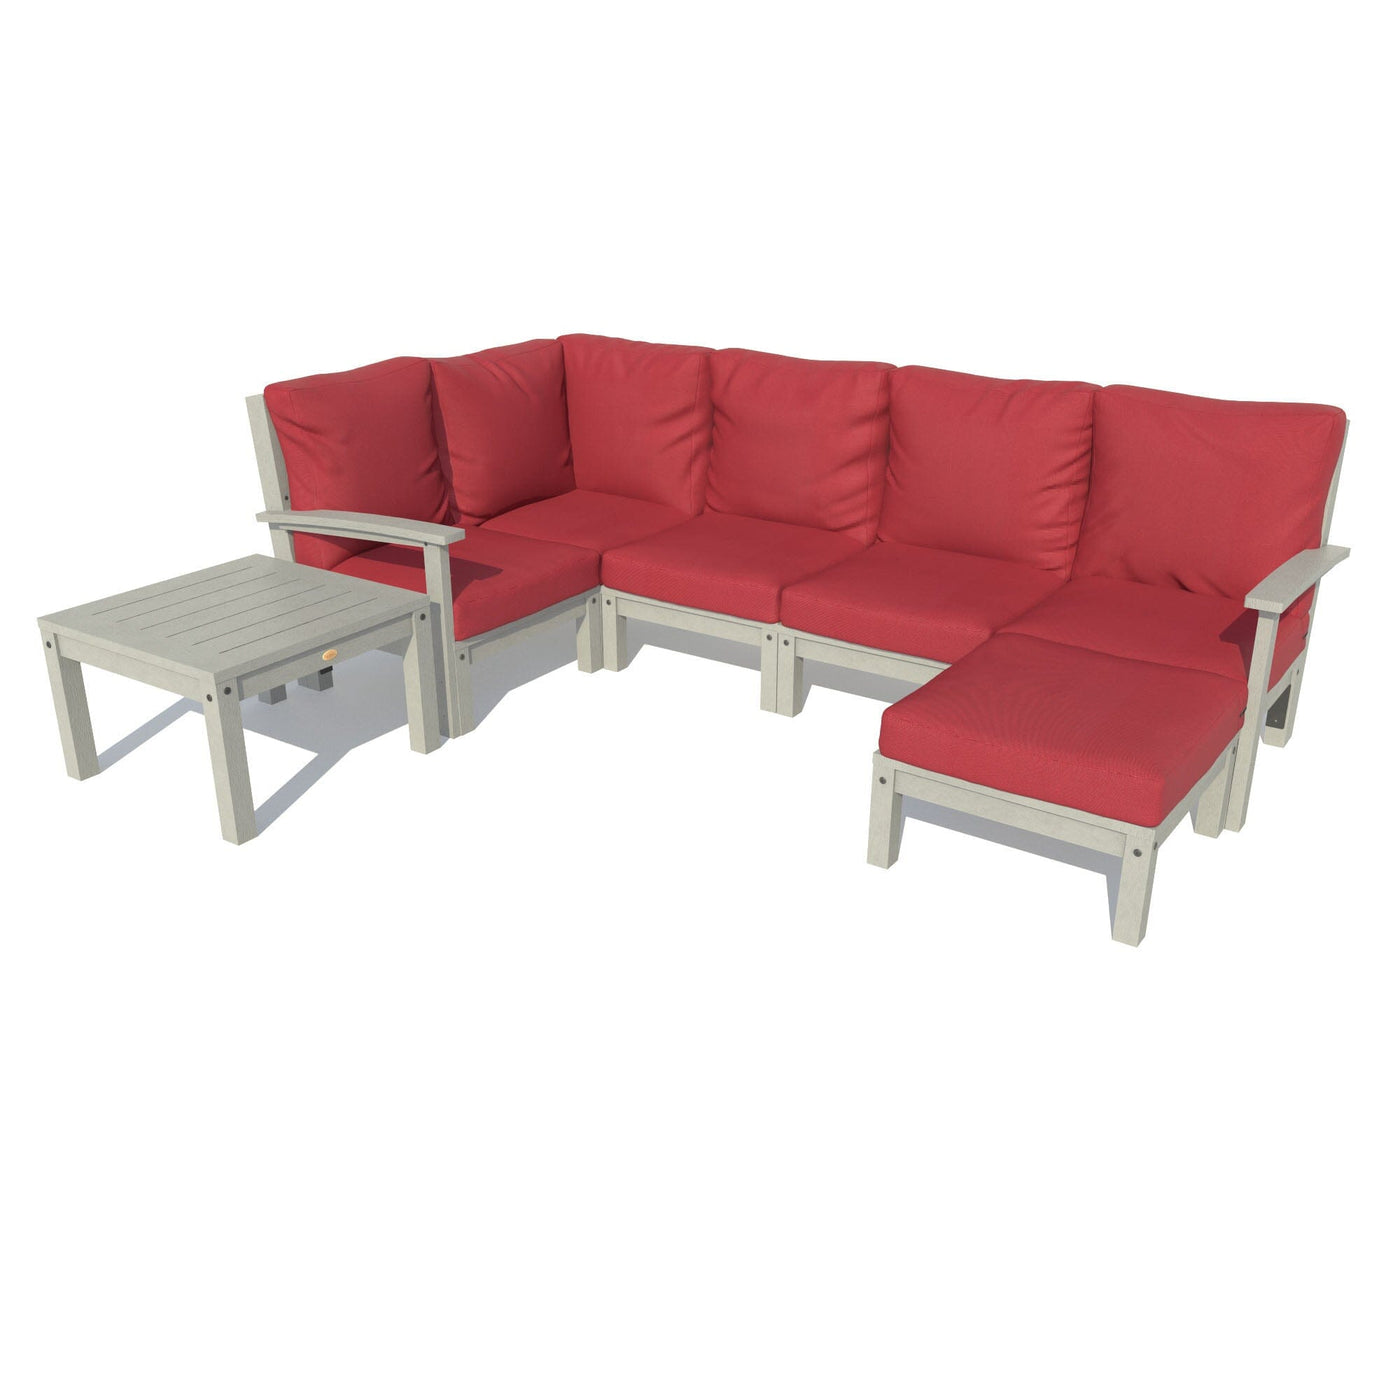 Bespoke Deep Seating: 7 Piece Sectional Set with Ottoman and Side Table Deep Seating Highwood USA Firecracker Red Coastal Teak 